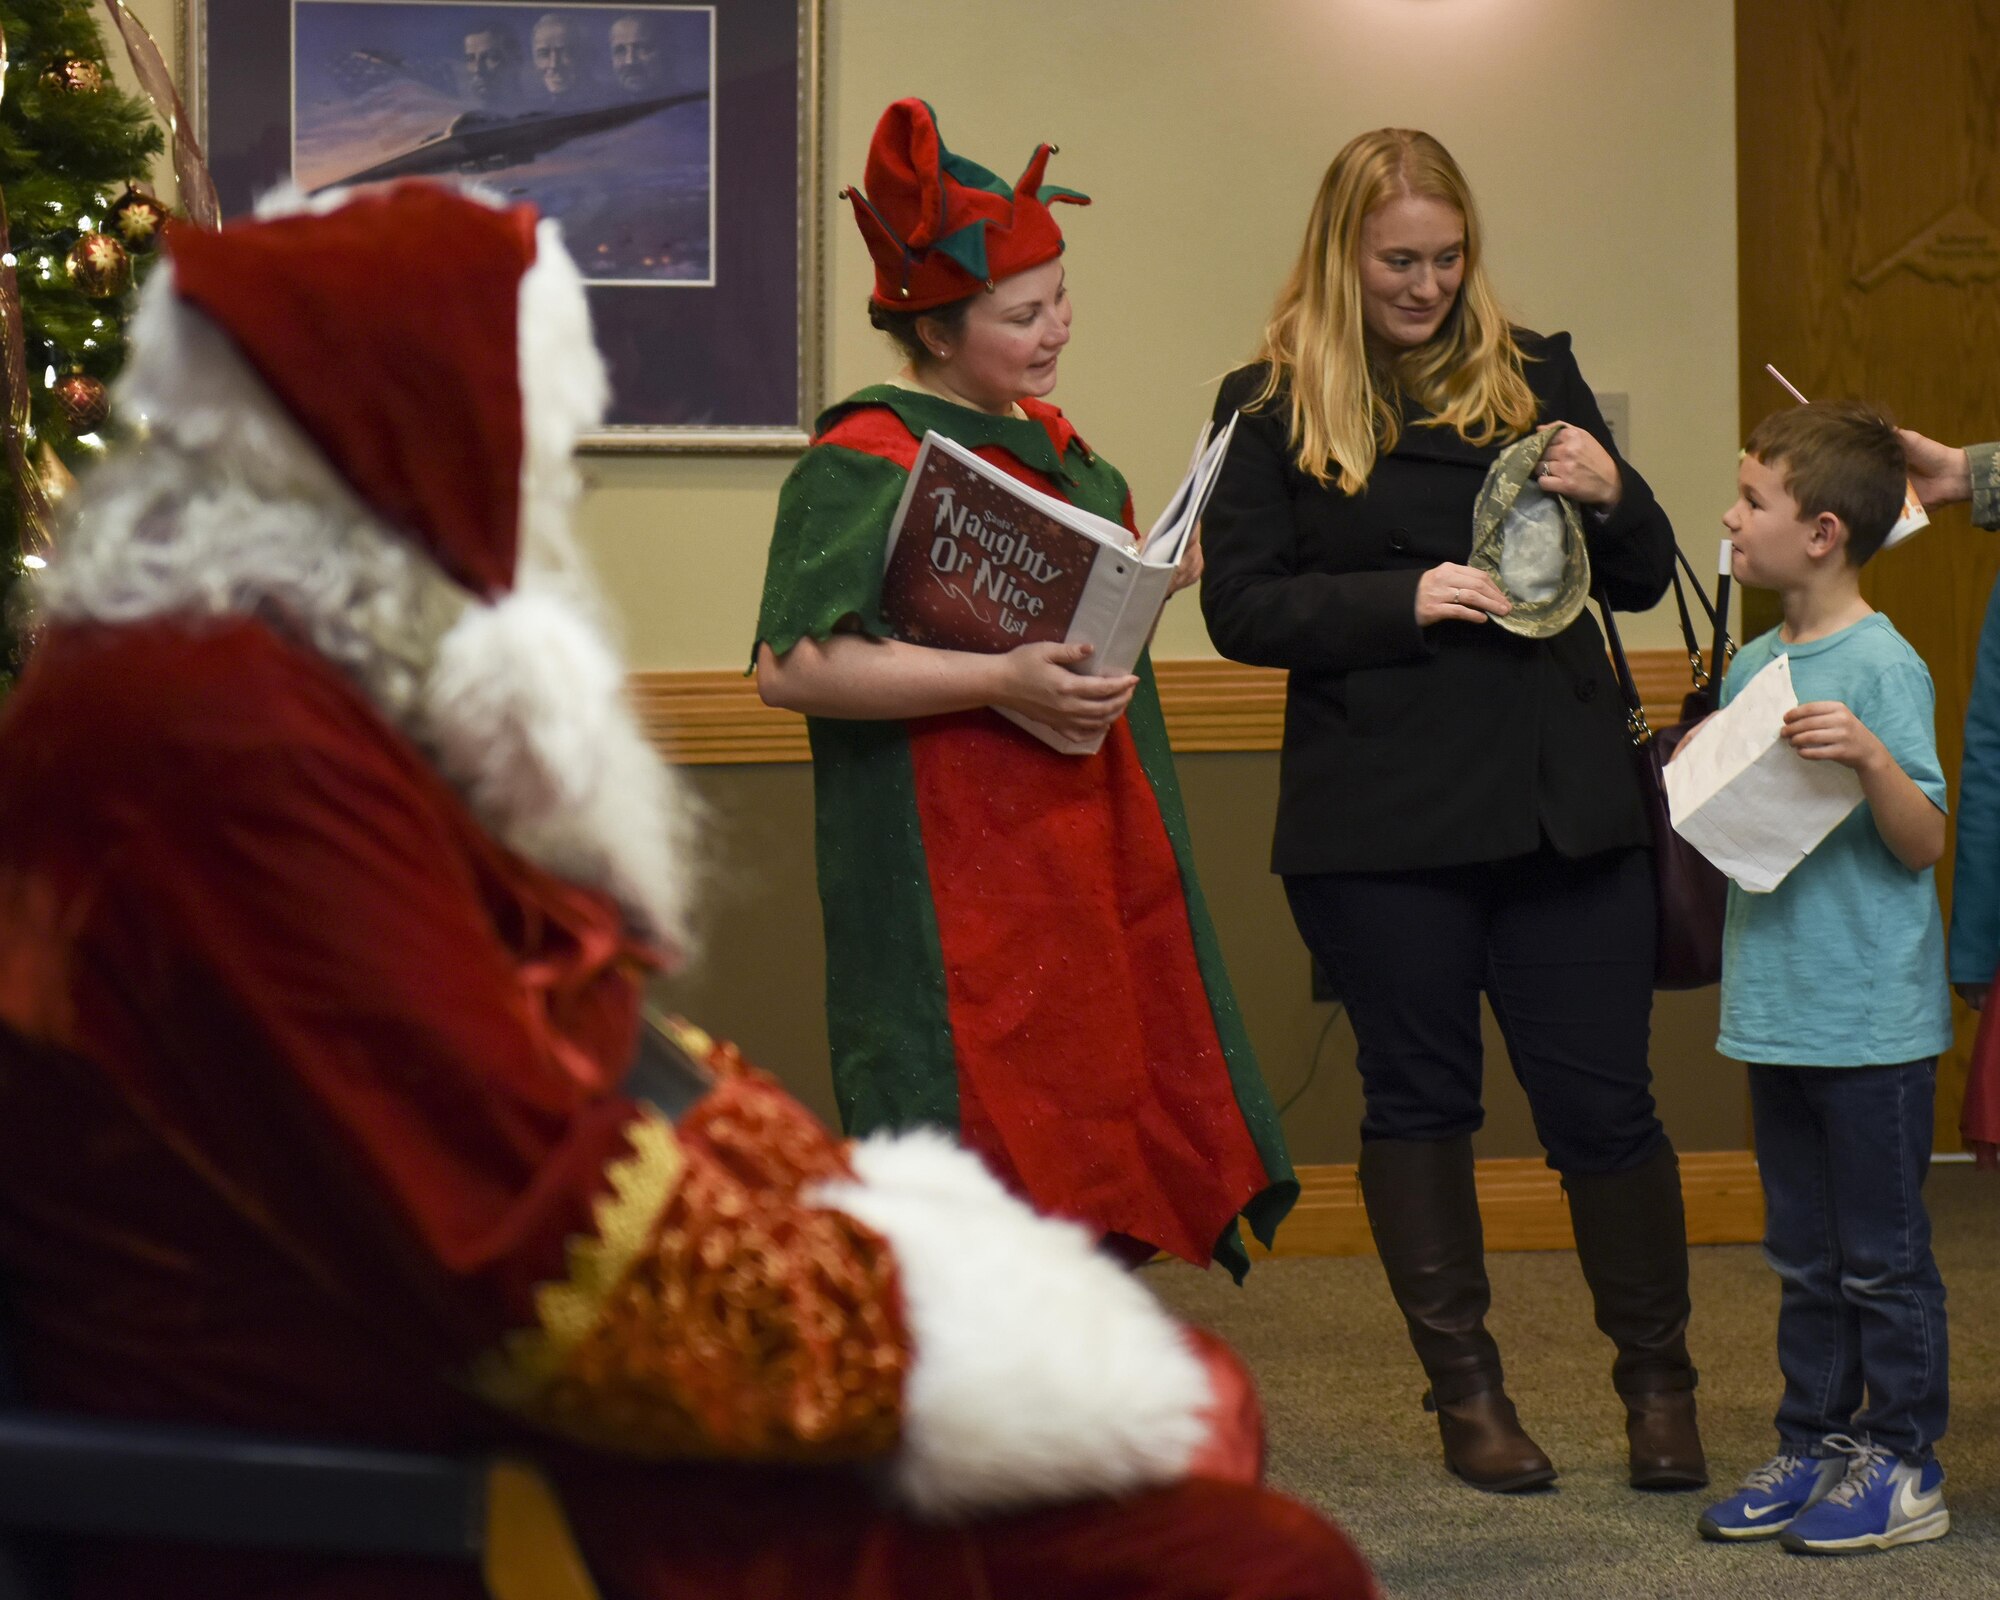 A volunteer dressed as an elf, center left, listens to a child, right, explaining why he should be on the nice list before meeting Santa during the annual tree lighting event at Whiteman Air Force Base, Mo., Nov. 29, 2016. Approximately 1,400 people attended the event, which was made possible by a total of 16 volunteers.